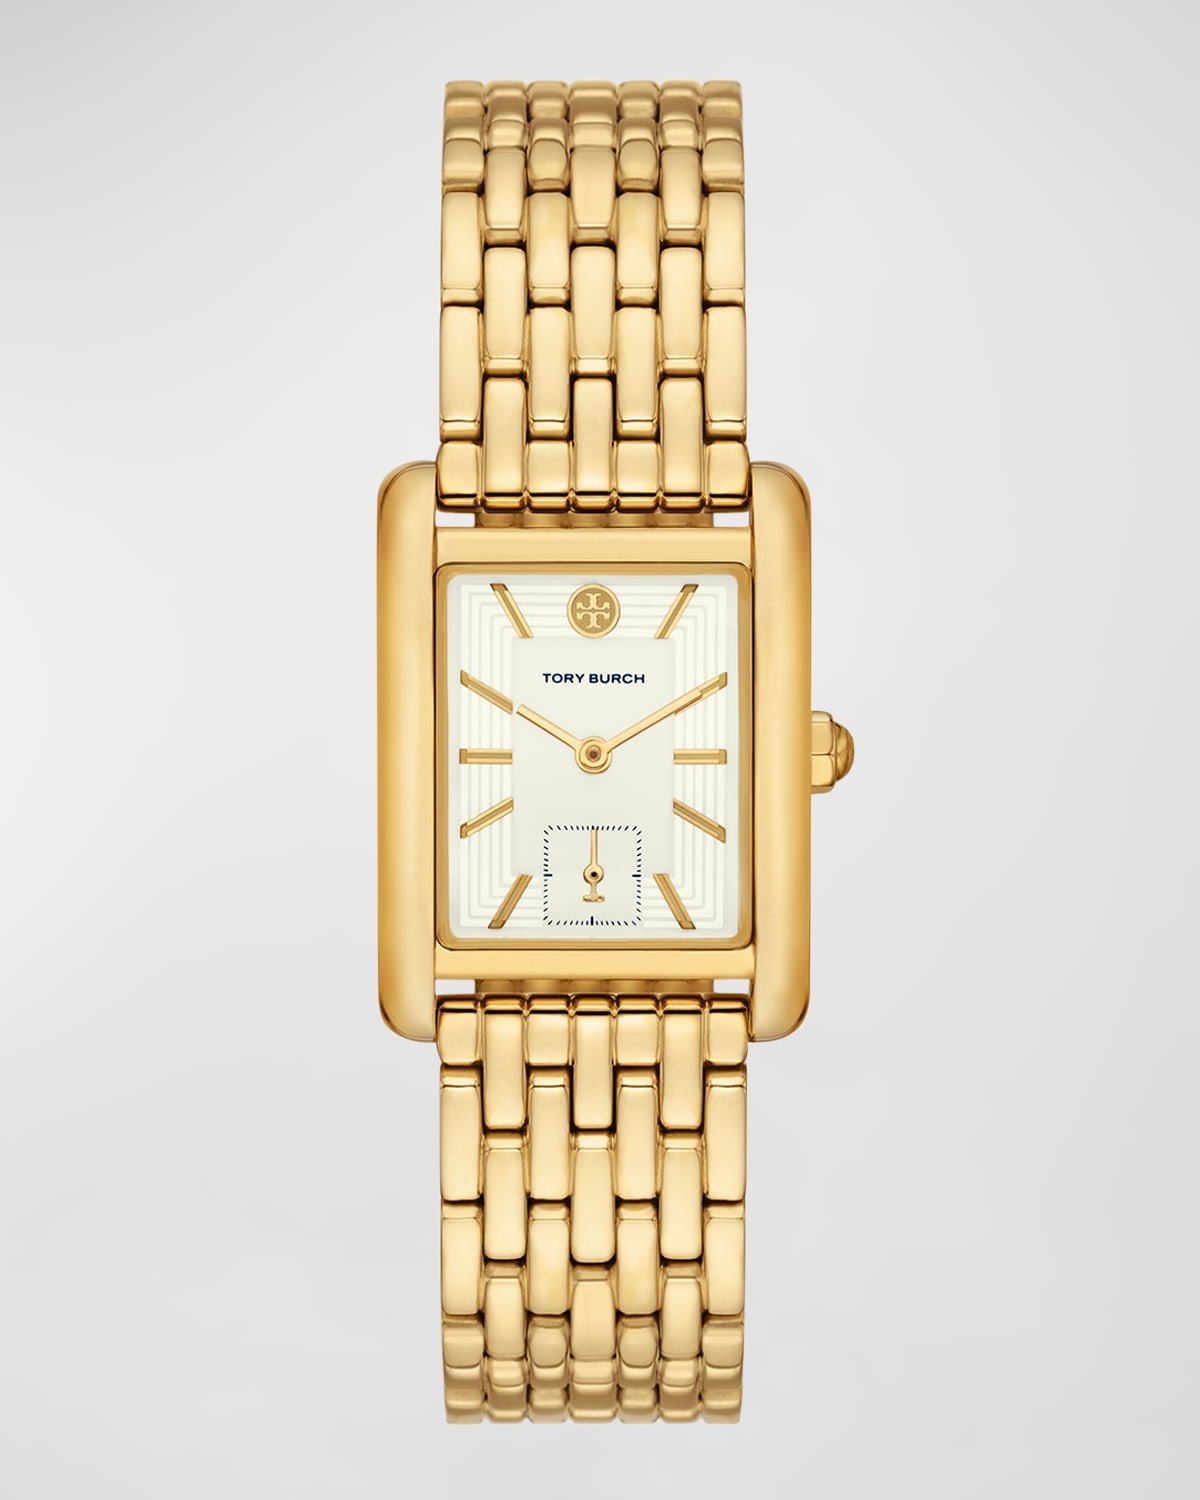 TORY BURCH THE ELEANOR WATCH - GOLD-TONE STAINLESS STEEL